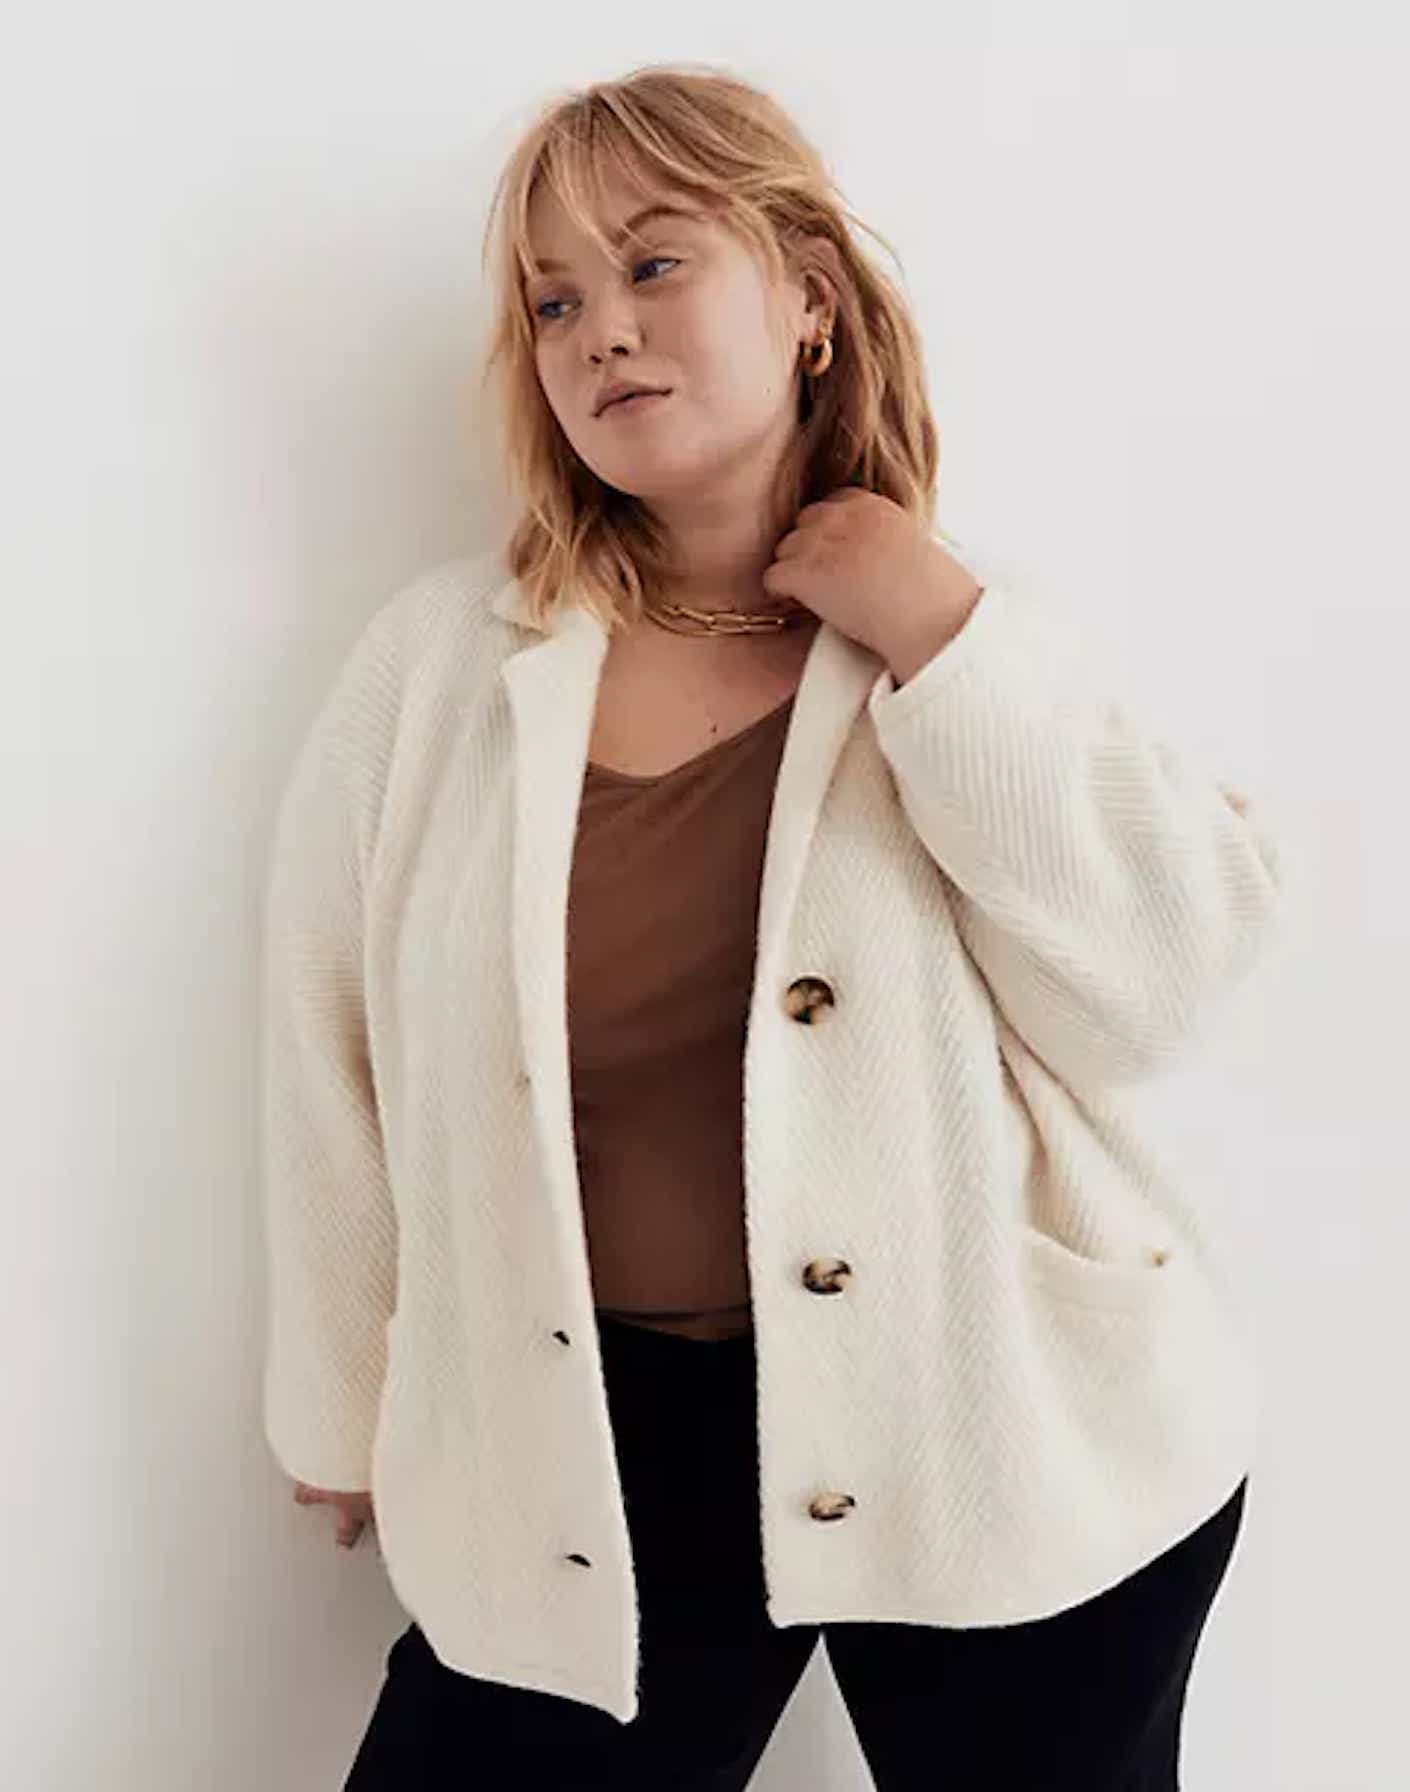 A woman wears a button down, off-white, thick cardigan sweater.